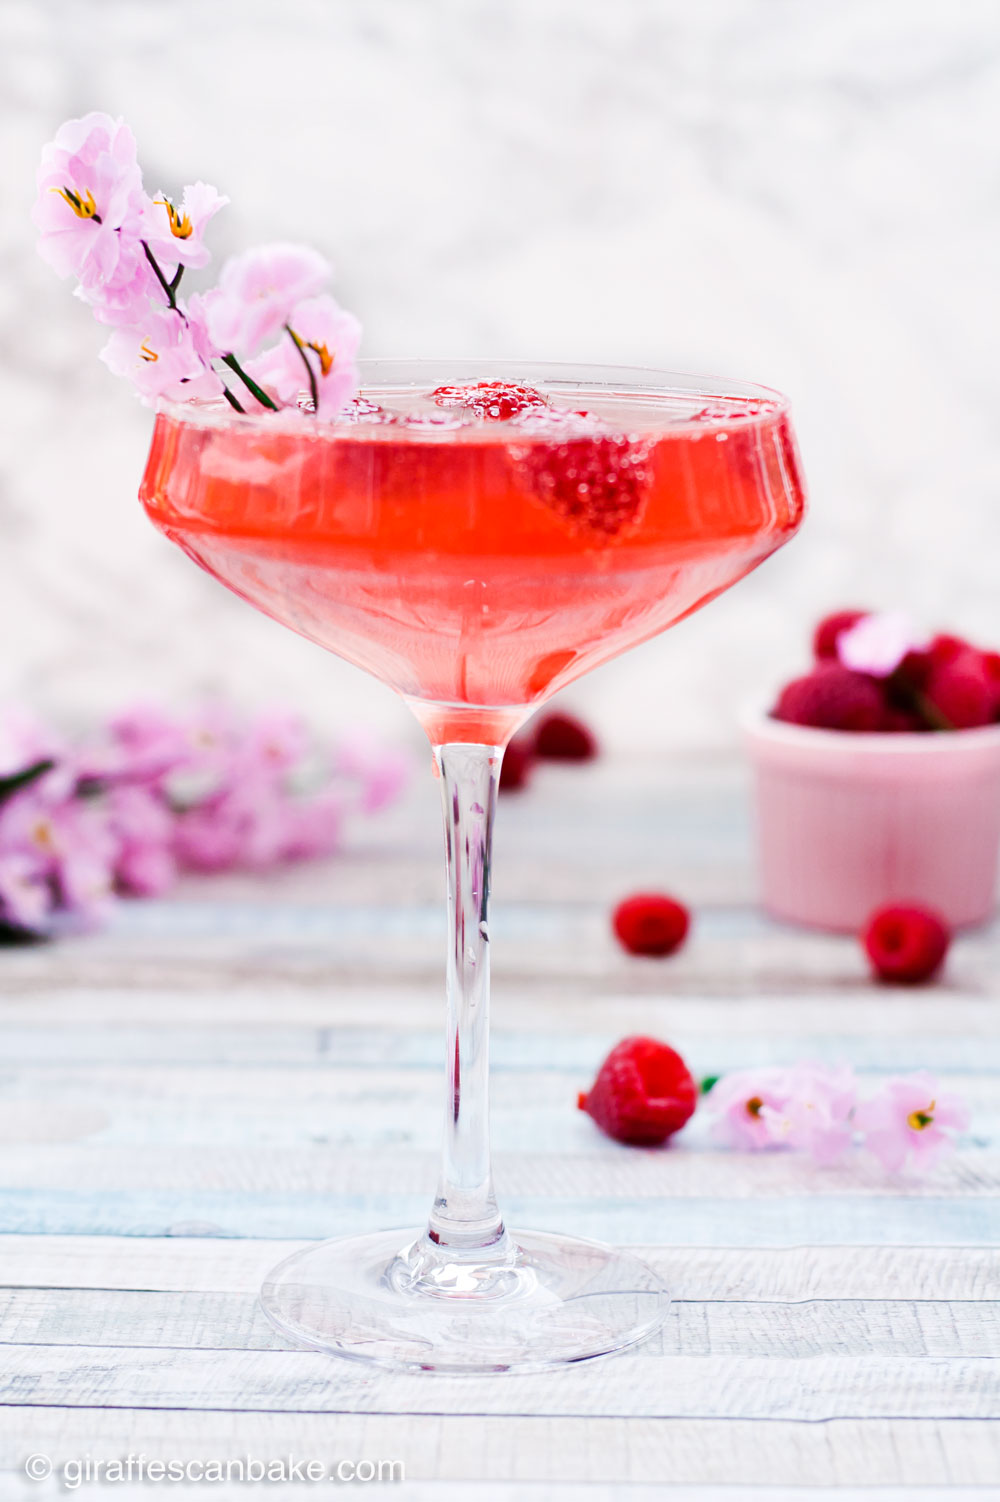 Peach vodka, fresh raspberry syrup and champagne are combined to make this gorgeous Mother’s Day Raspberry Peach Champagne Cocktail. Sweet, bubbly and full of fresh, fruity flavours, this is the perfect cocktail to serve at a Mother’s Day brunch or any special occasion. Don’t have peach vodka to hand? No problem, I have an easy substitute for you! So raise a glass and let’s call a toast the wonderful Mother figures in our lives.